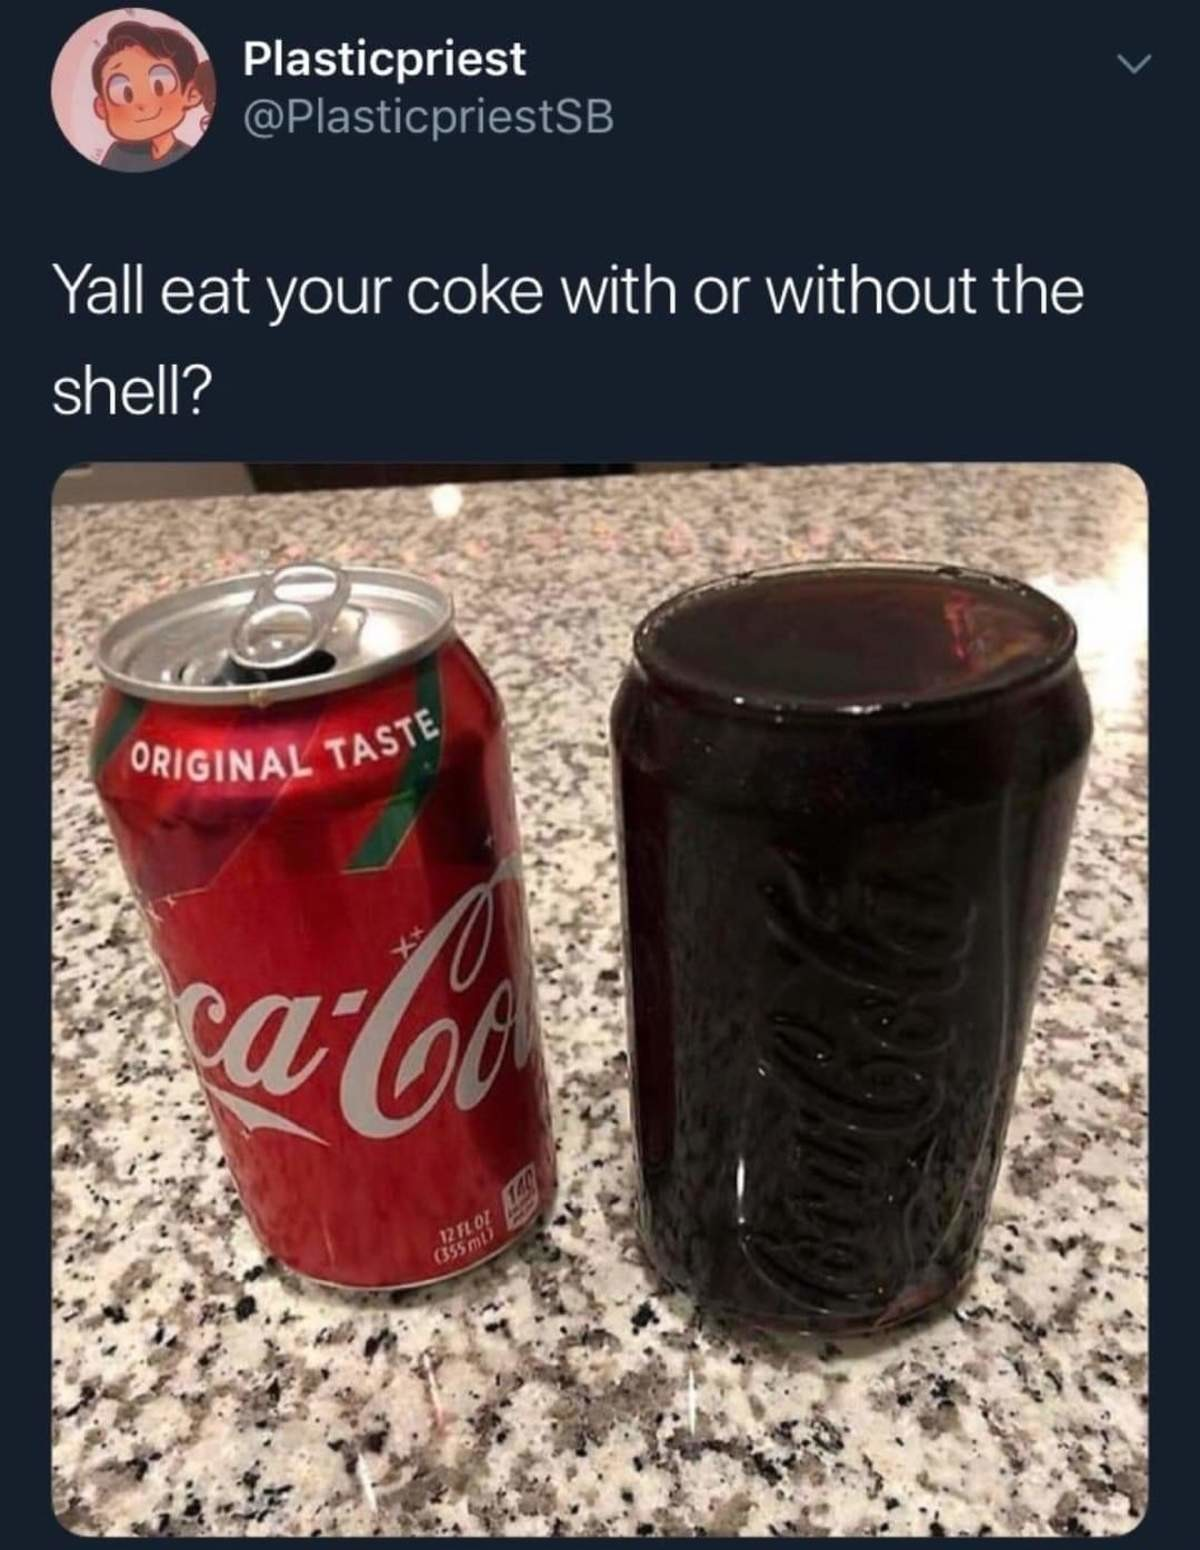 Either way, it still doesn't have any real coke